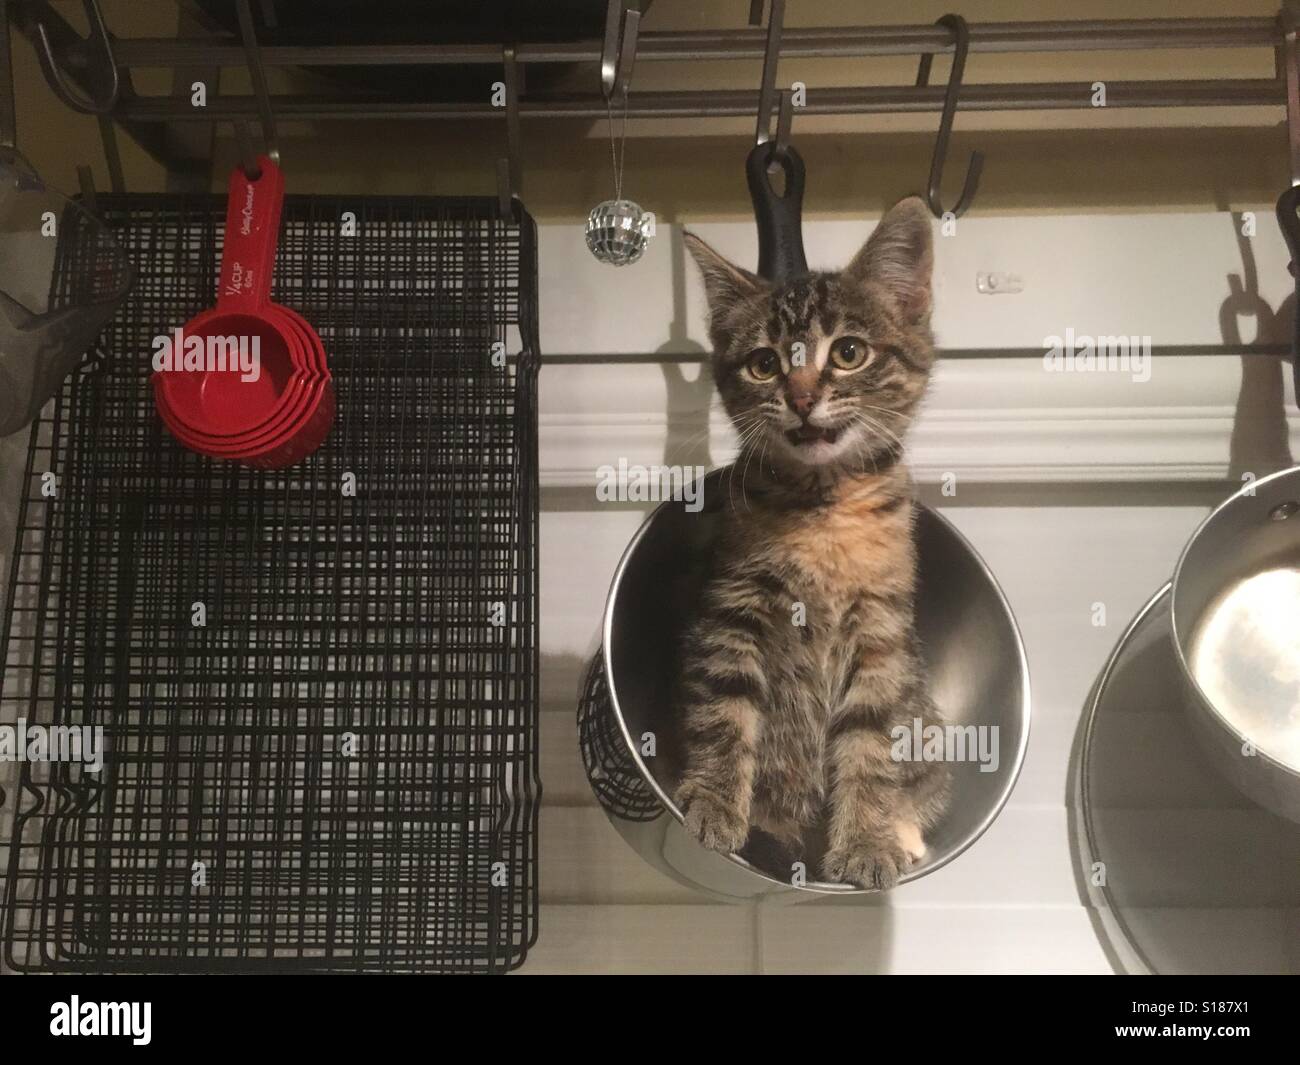 Premium Photo  Kittens sit in the kitchen scales and play